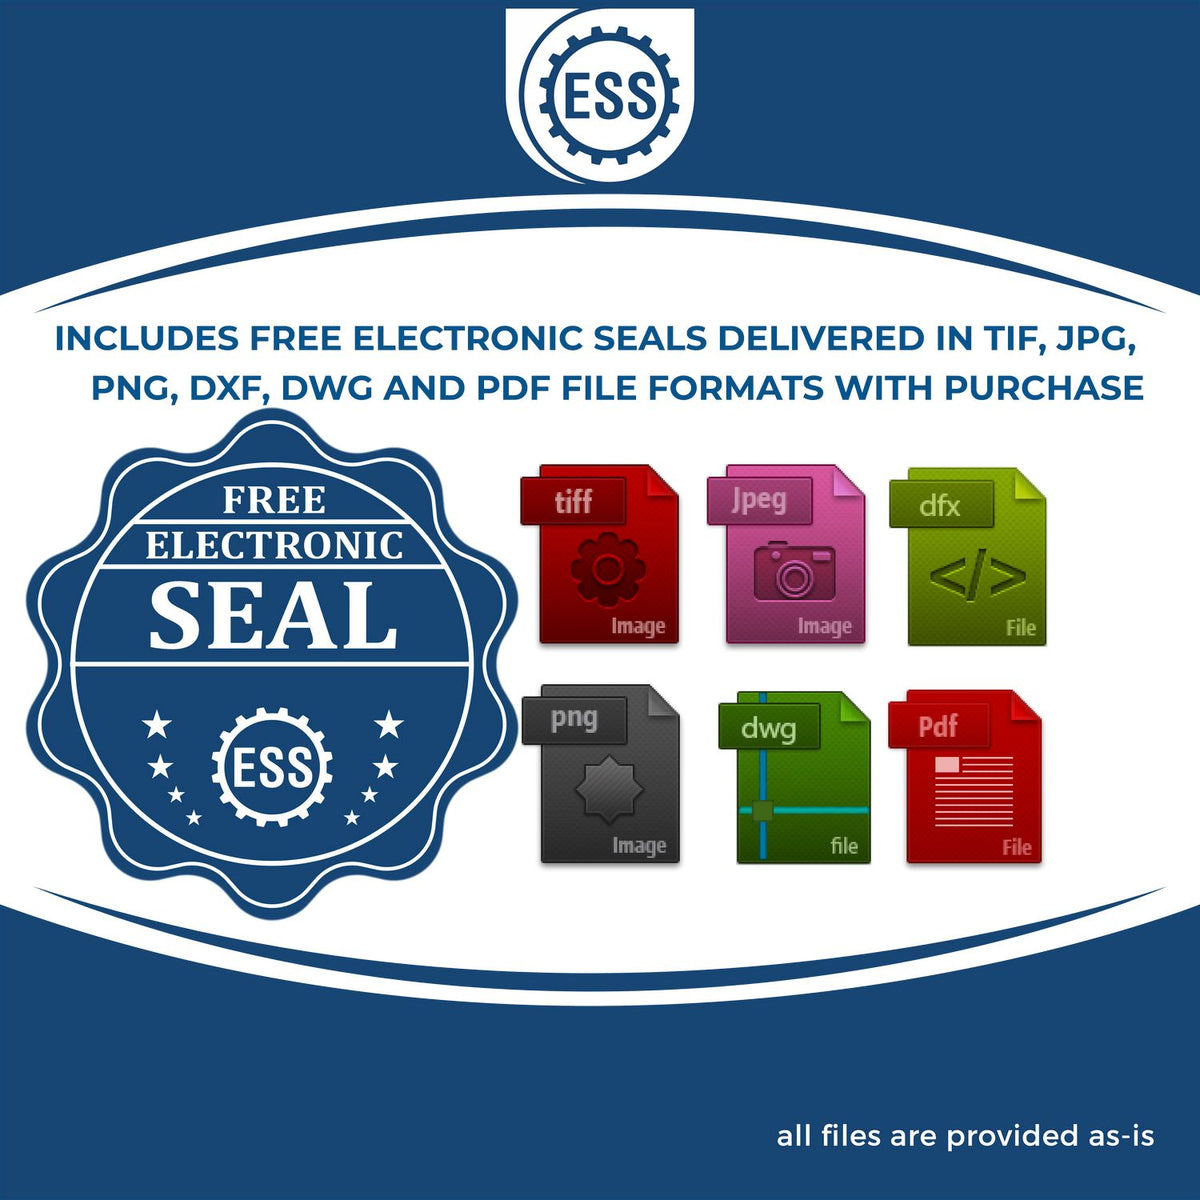 An infographic for the free electronic seal for the Hybrid Pennsylvania Land Surveyor Seal illustrating the different file type icons such as DXF, DWG, TIF, JPG and PNG.